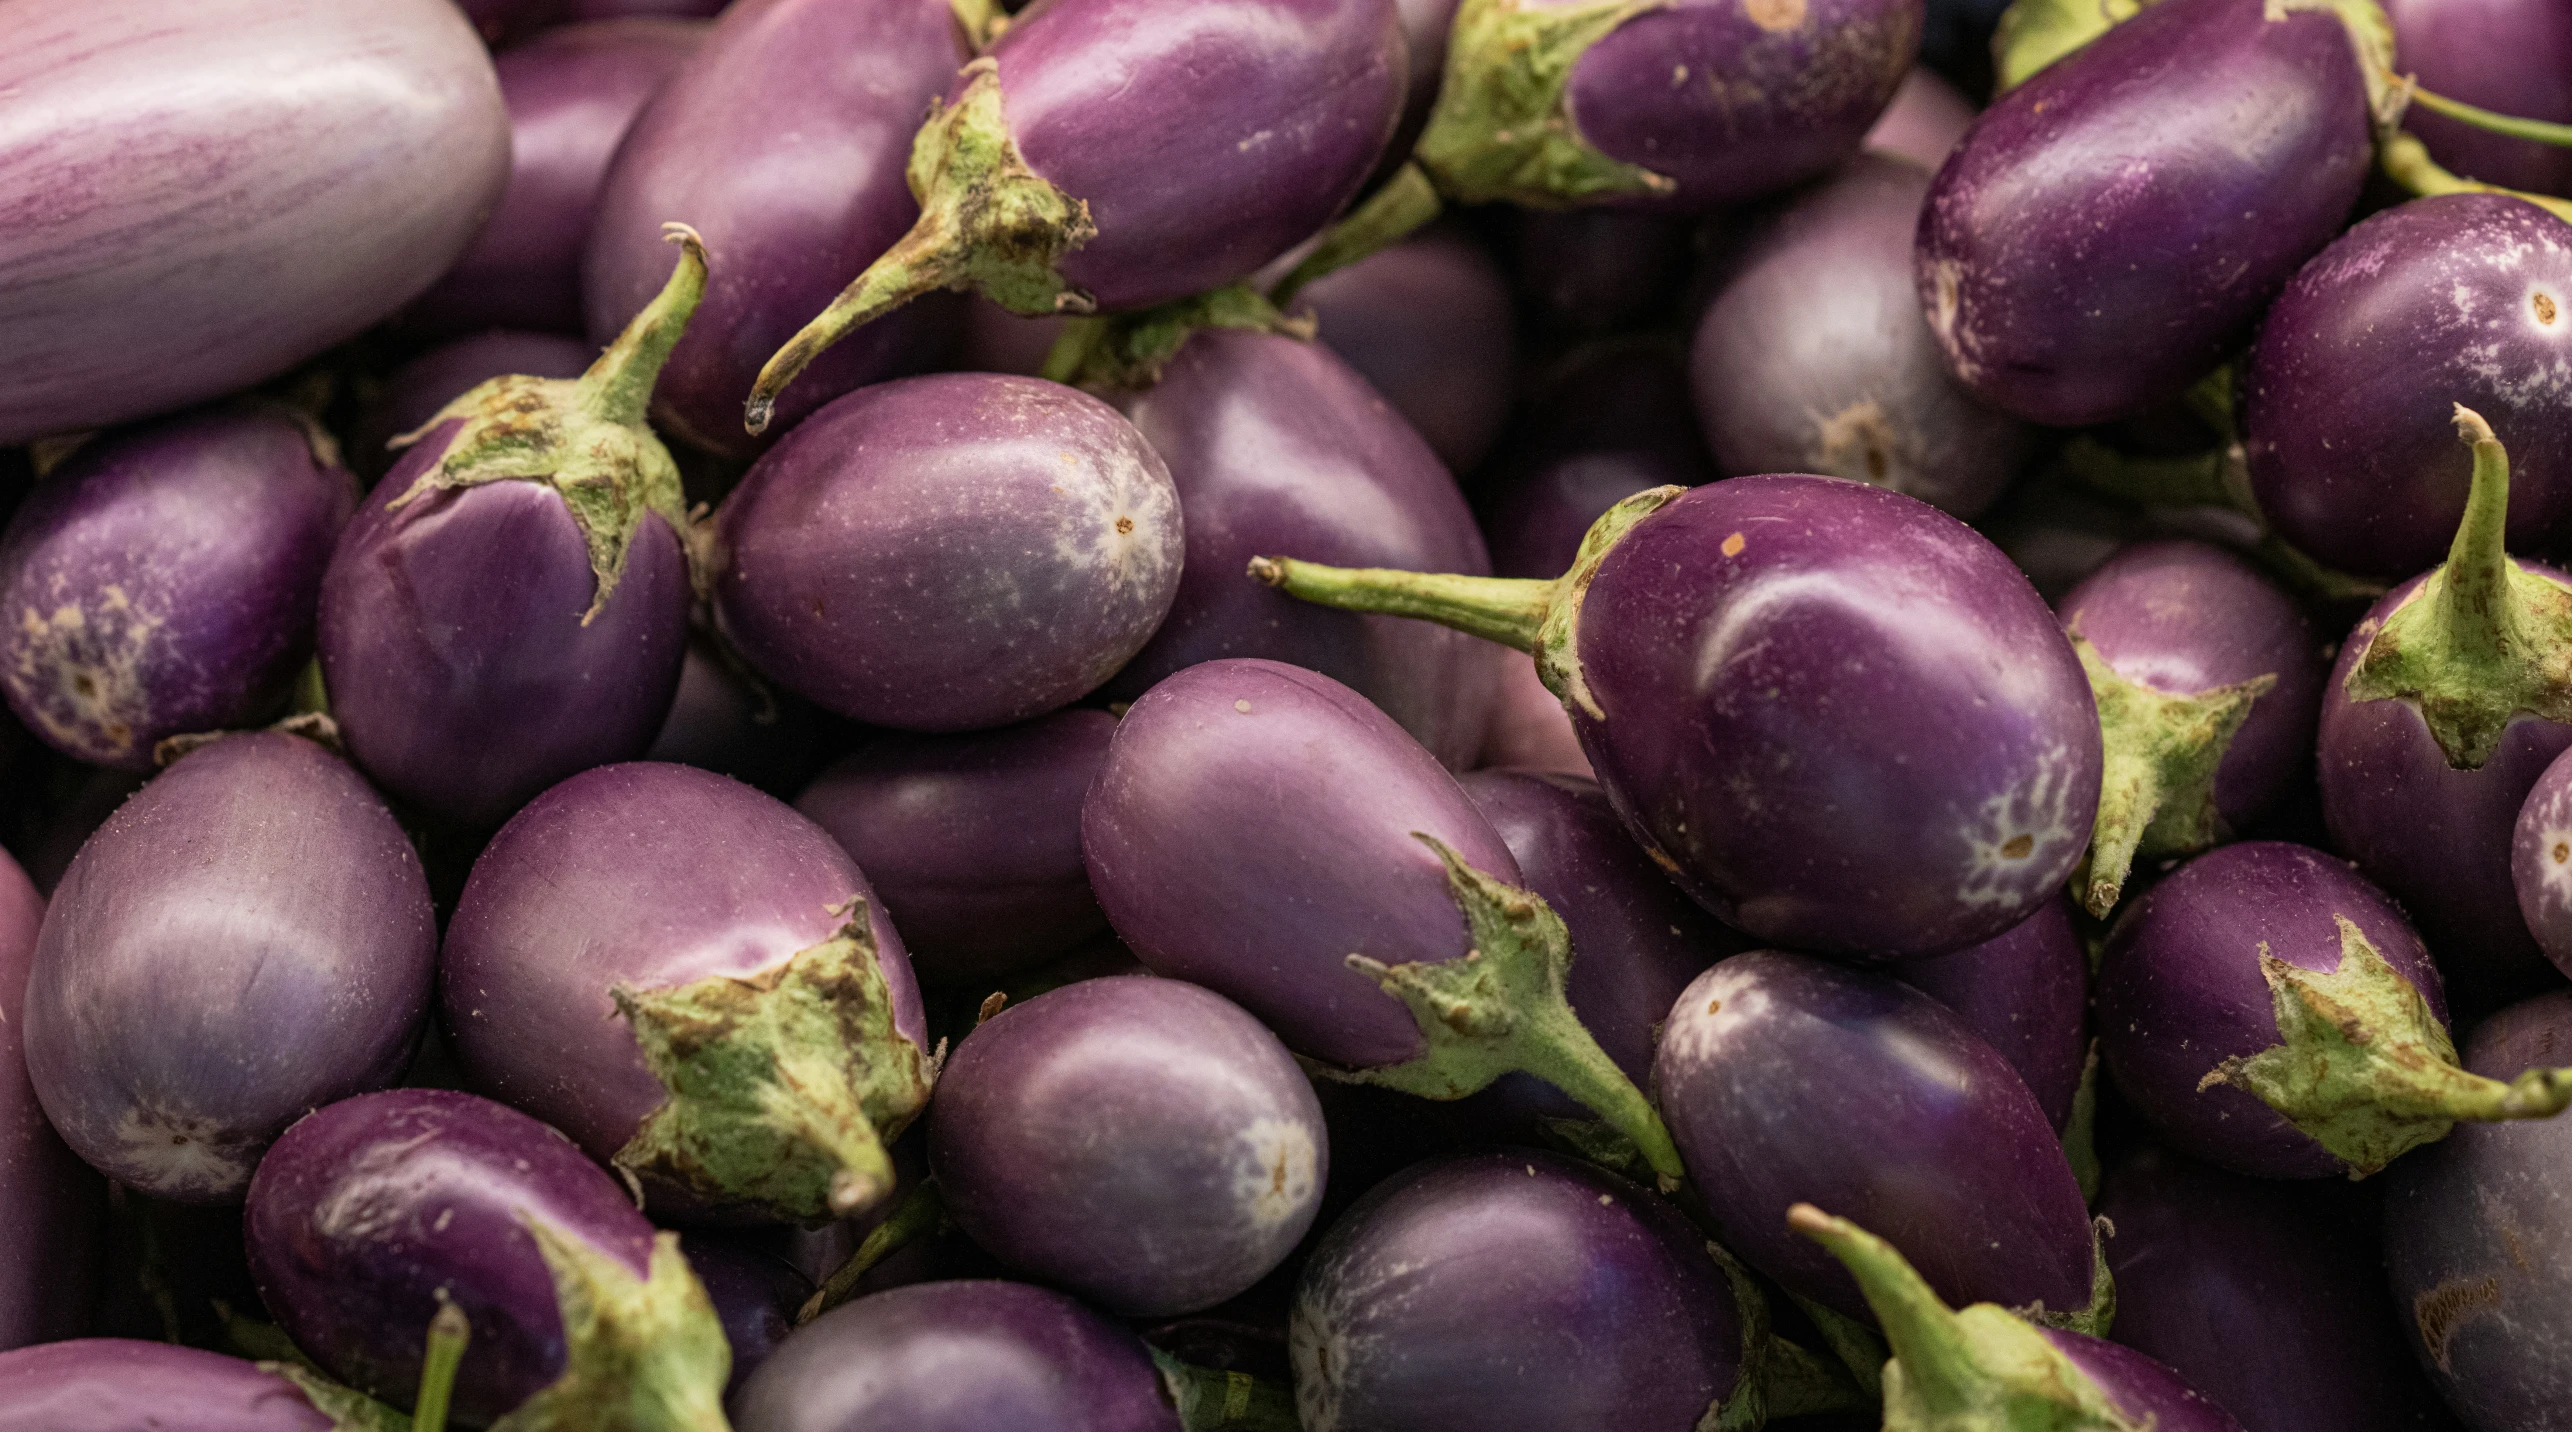 purple eggplant fruit piled up together in a pile